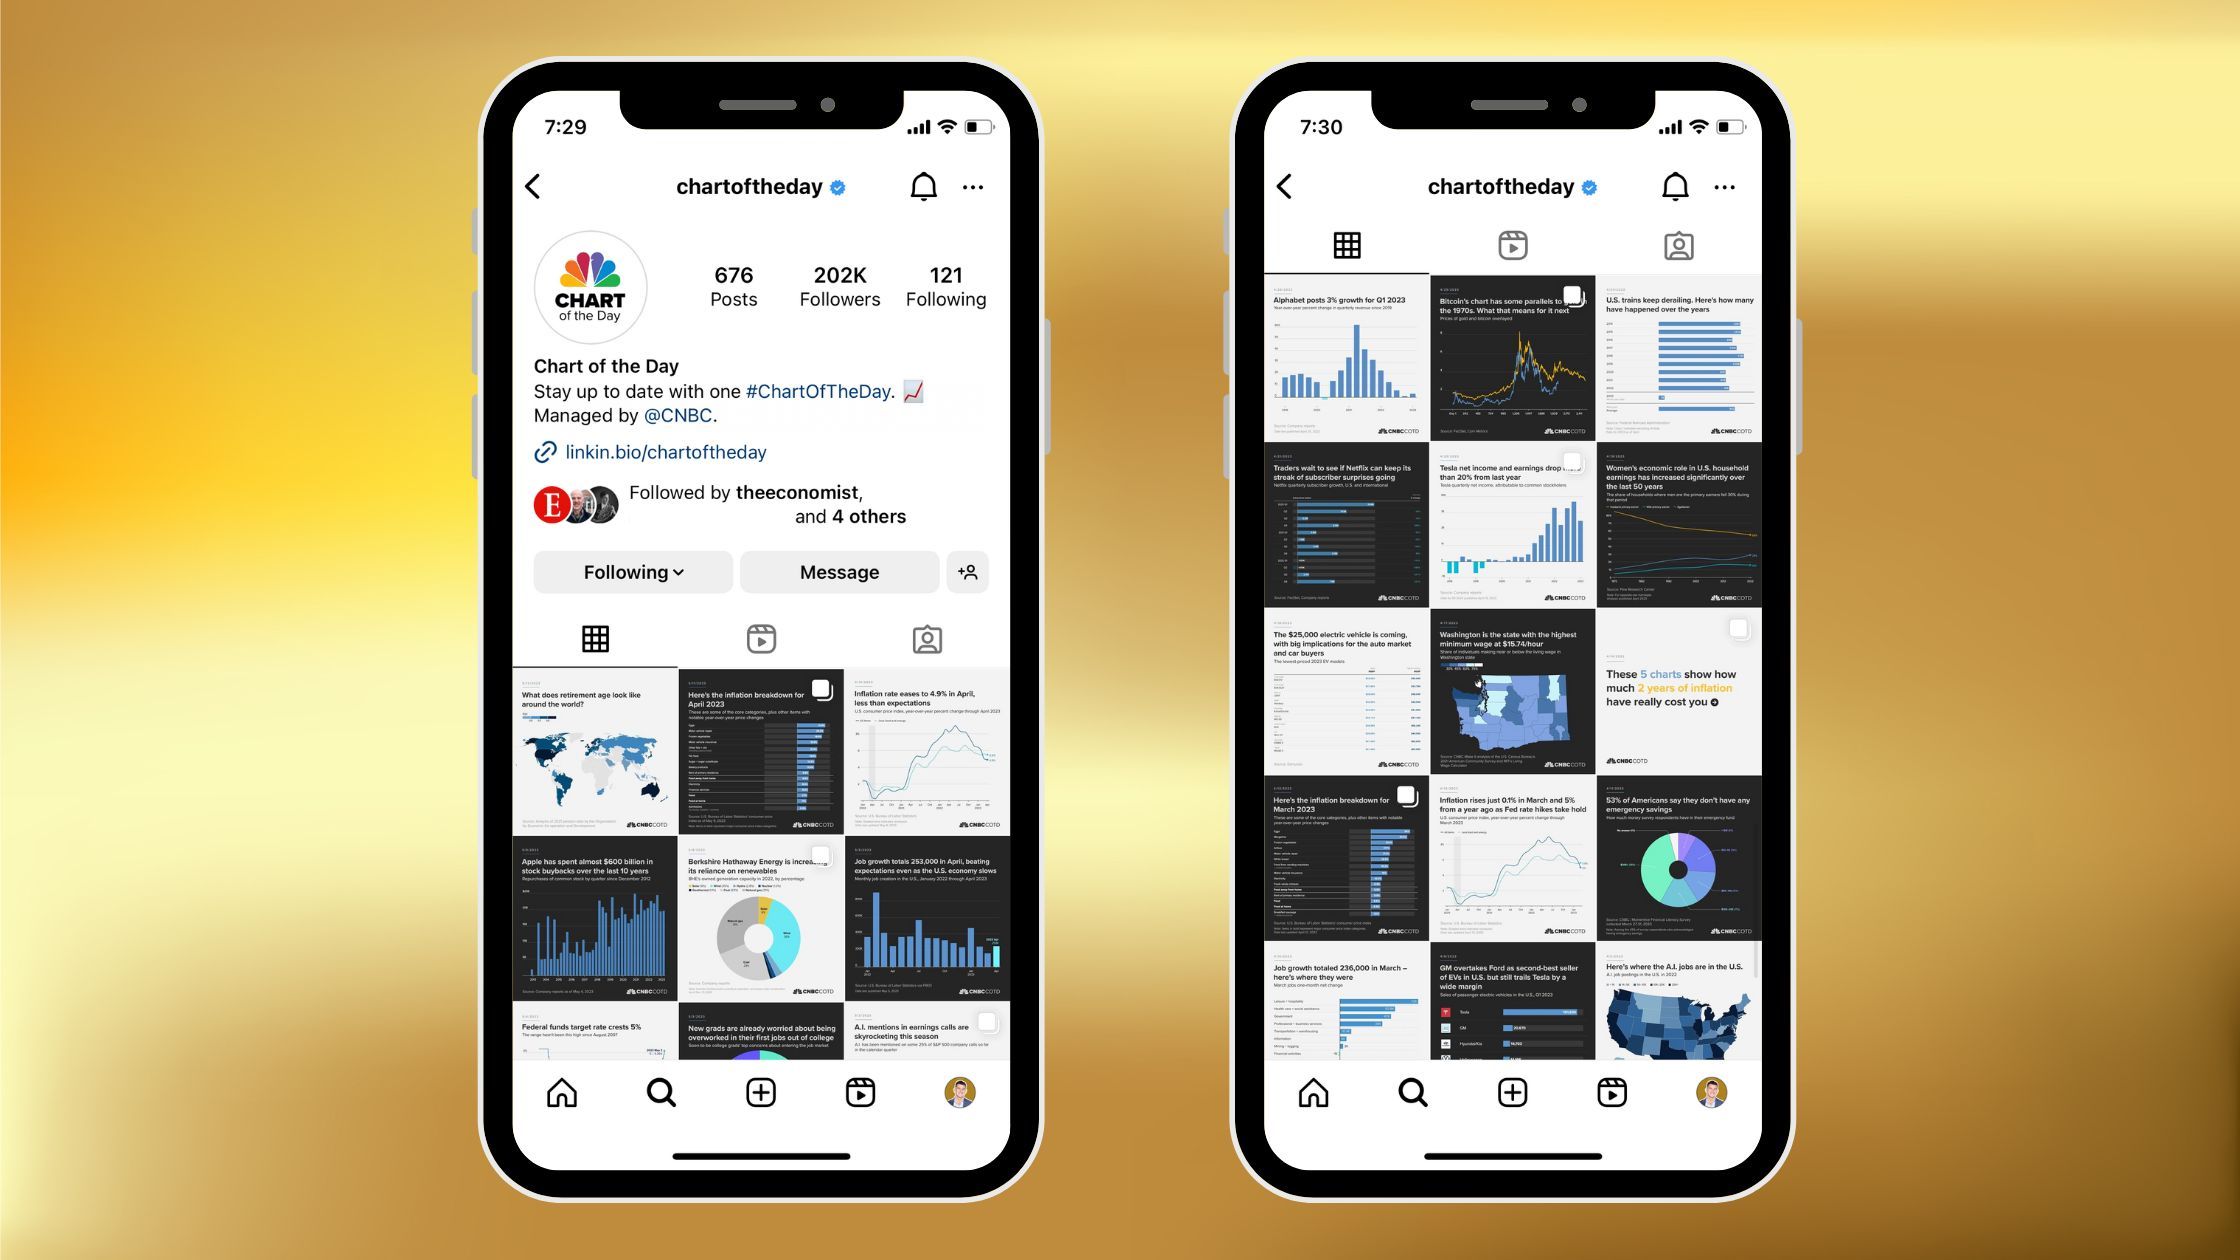 phone mockups of an instagram account showing charts, with a gold image background